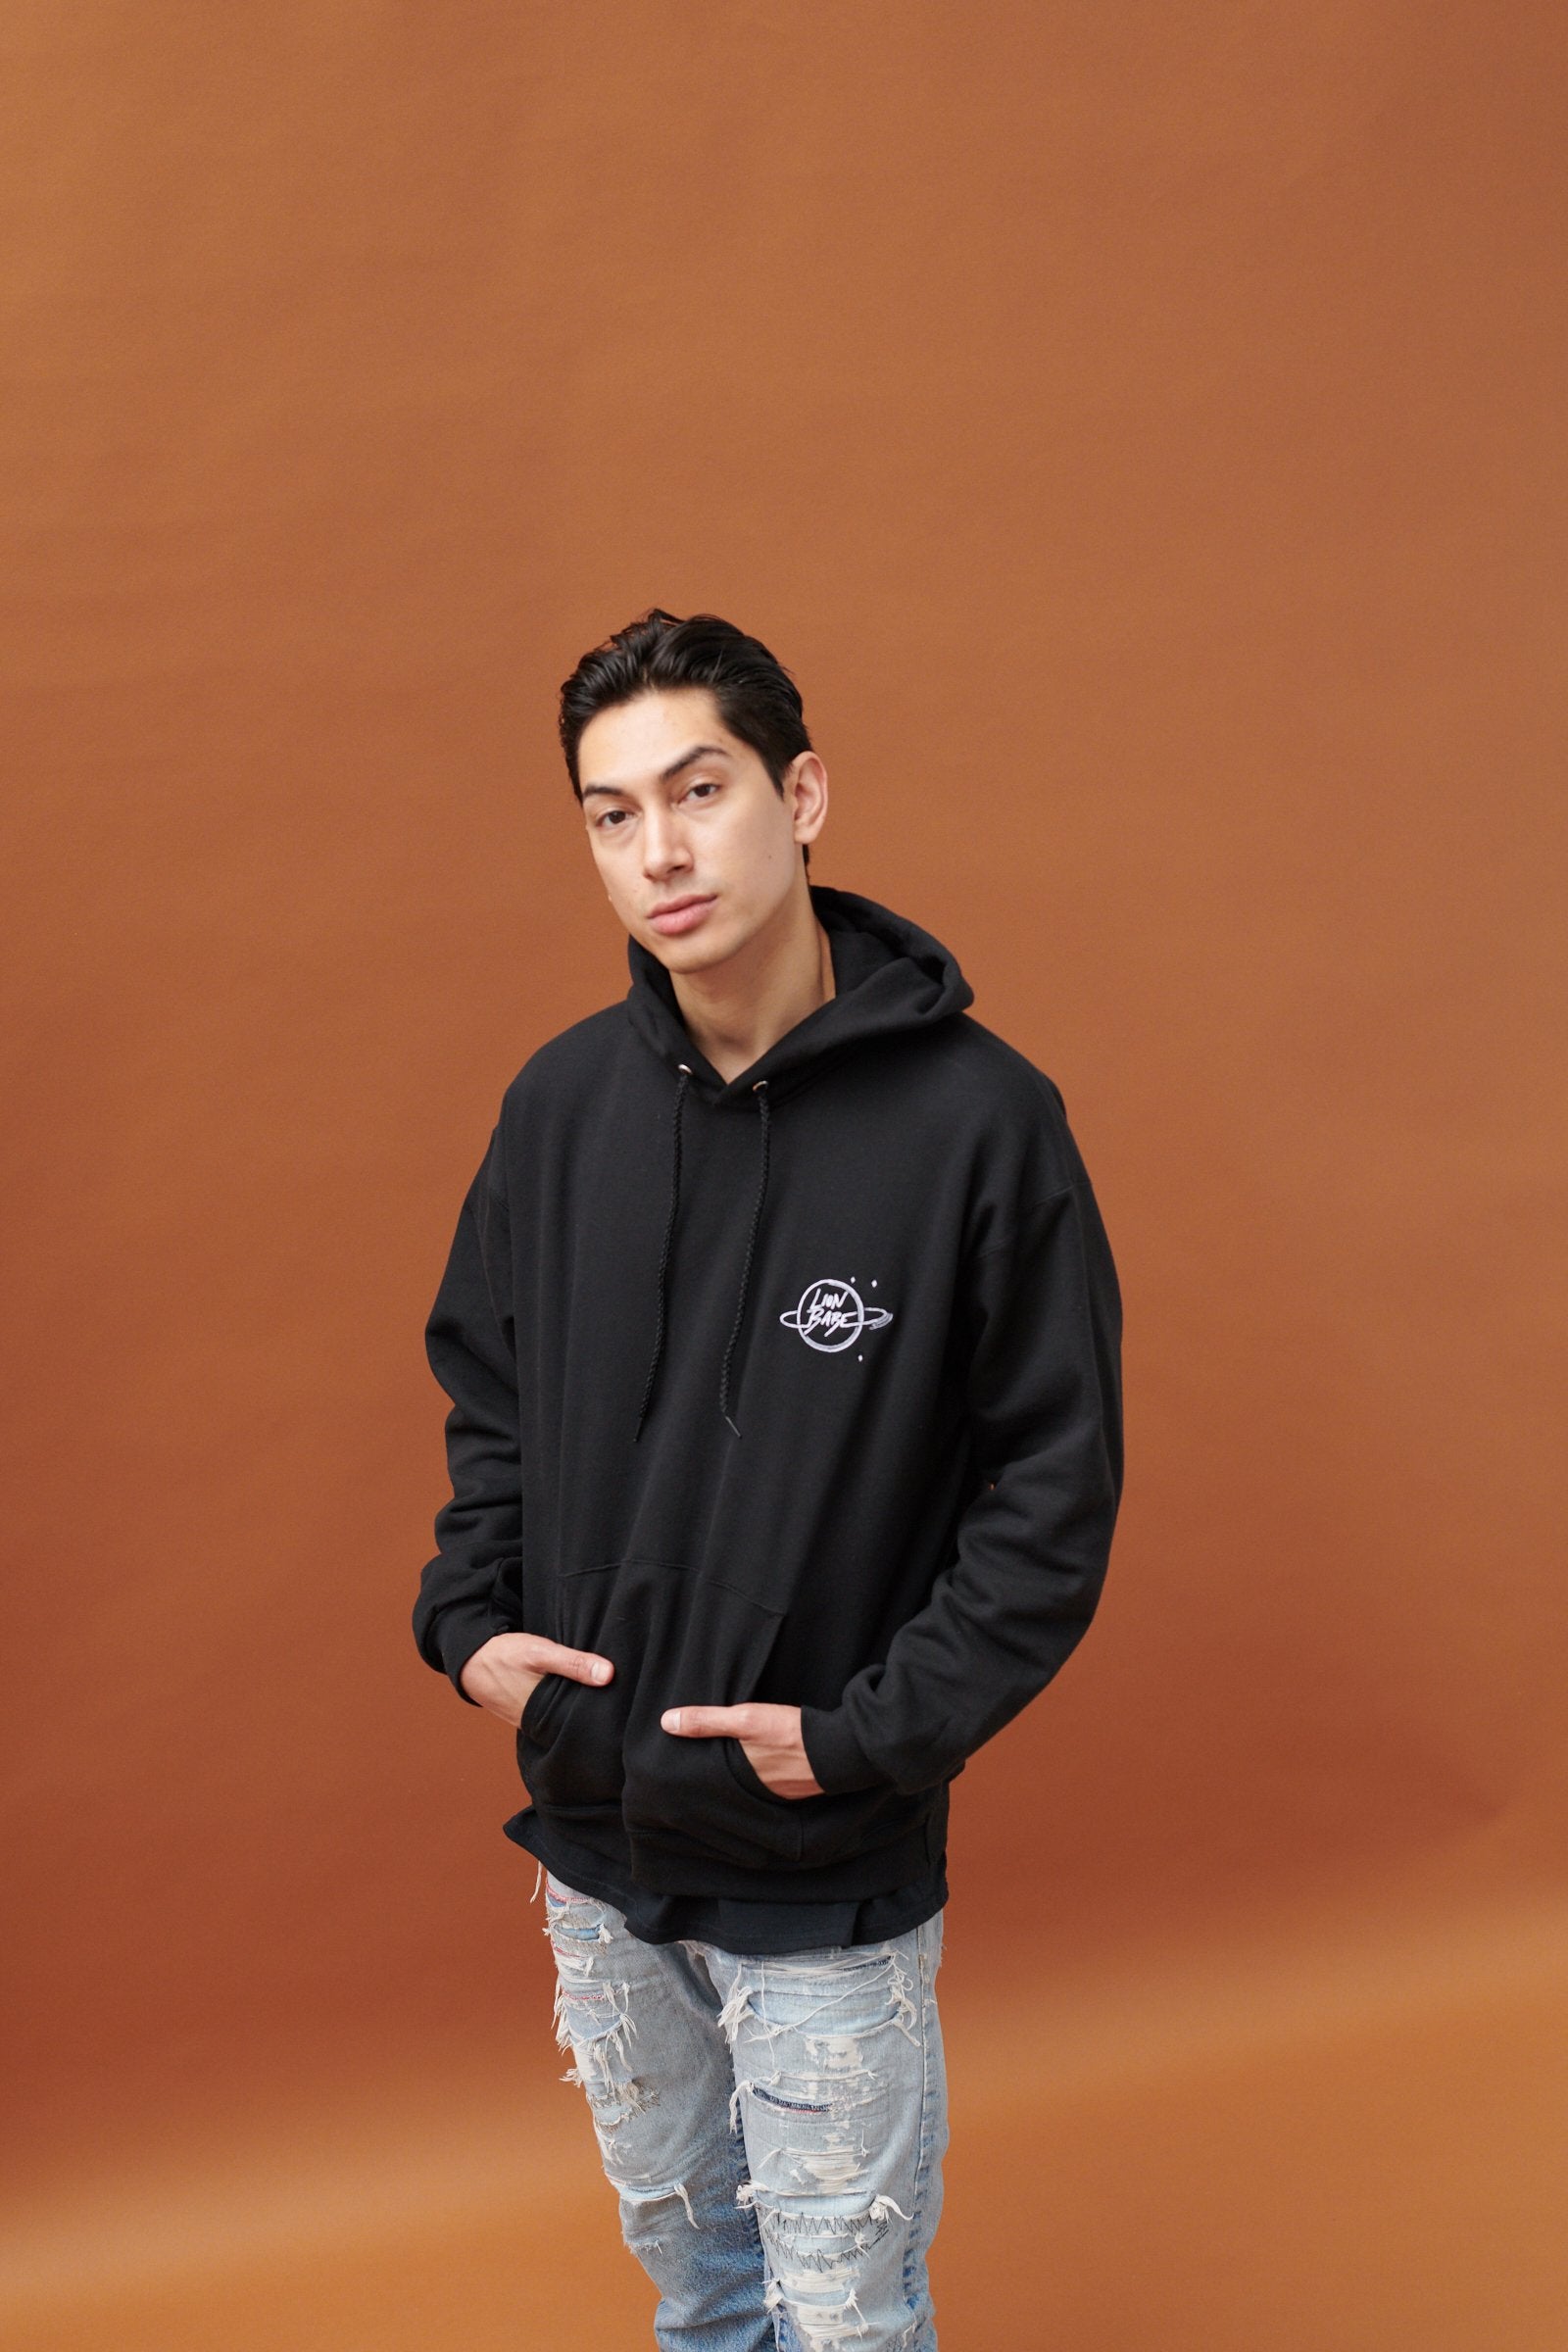 LION BABE EMBROIDERED LOGO HOODIE